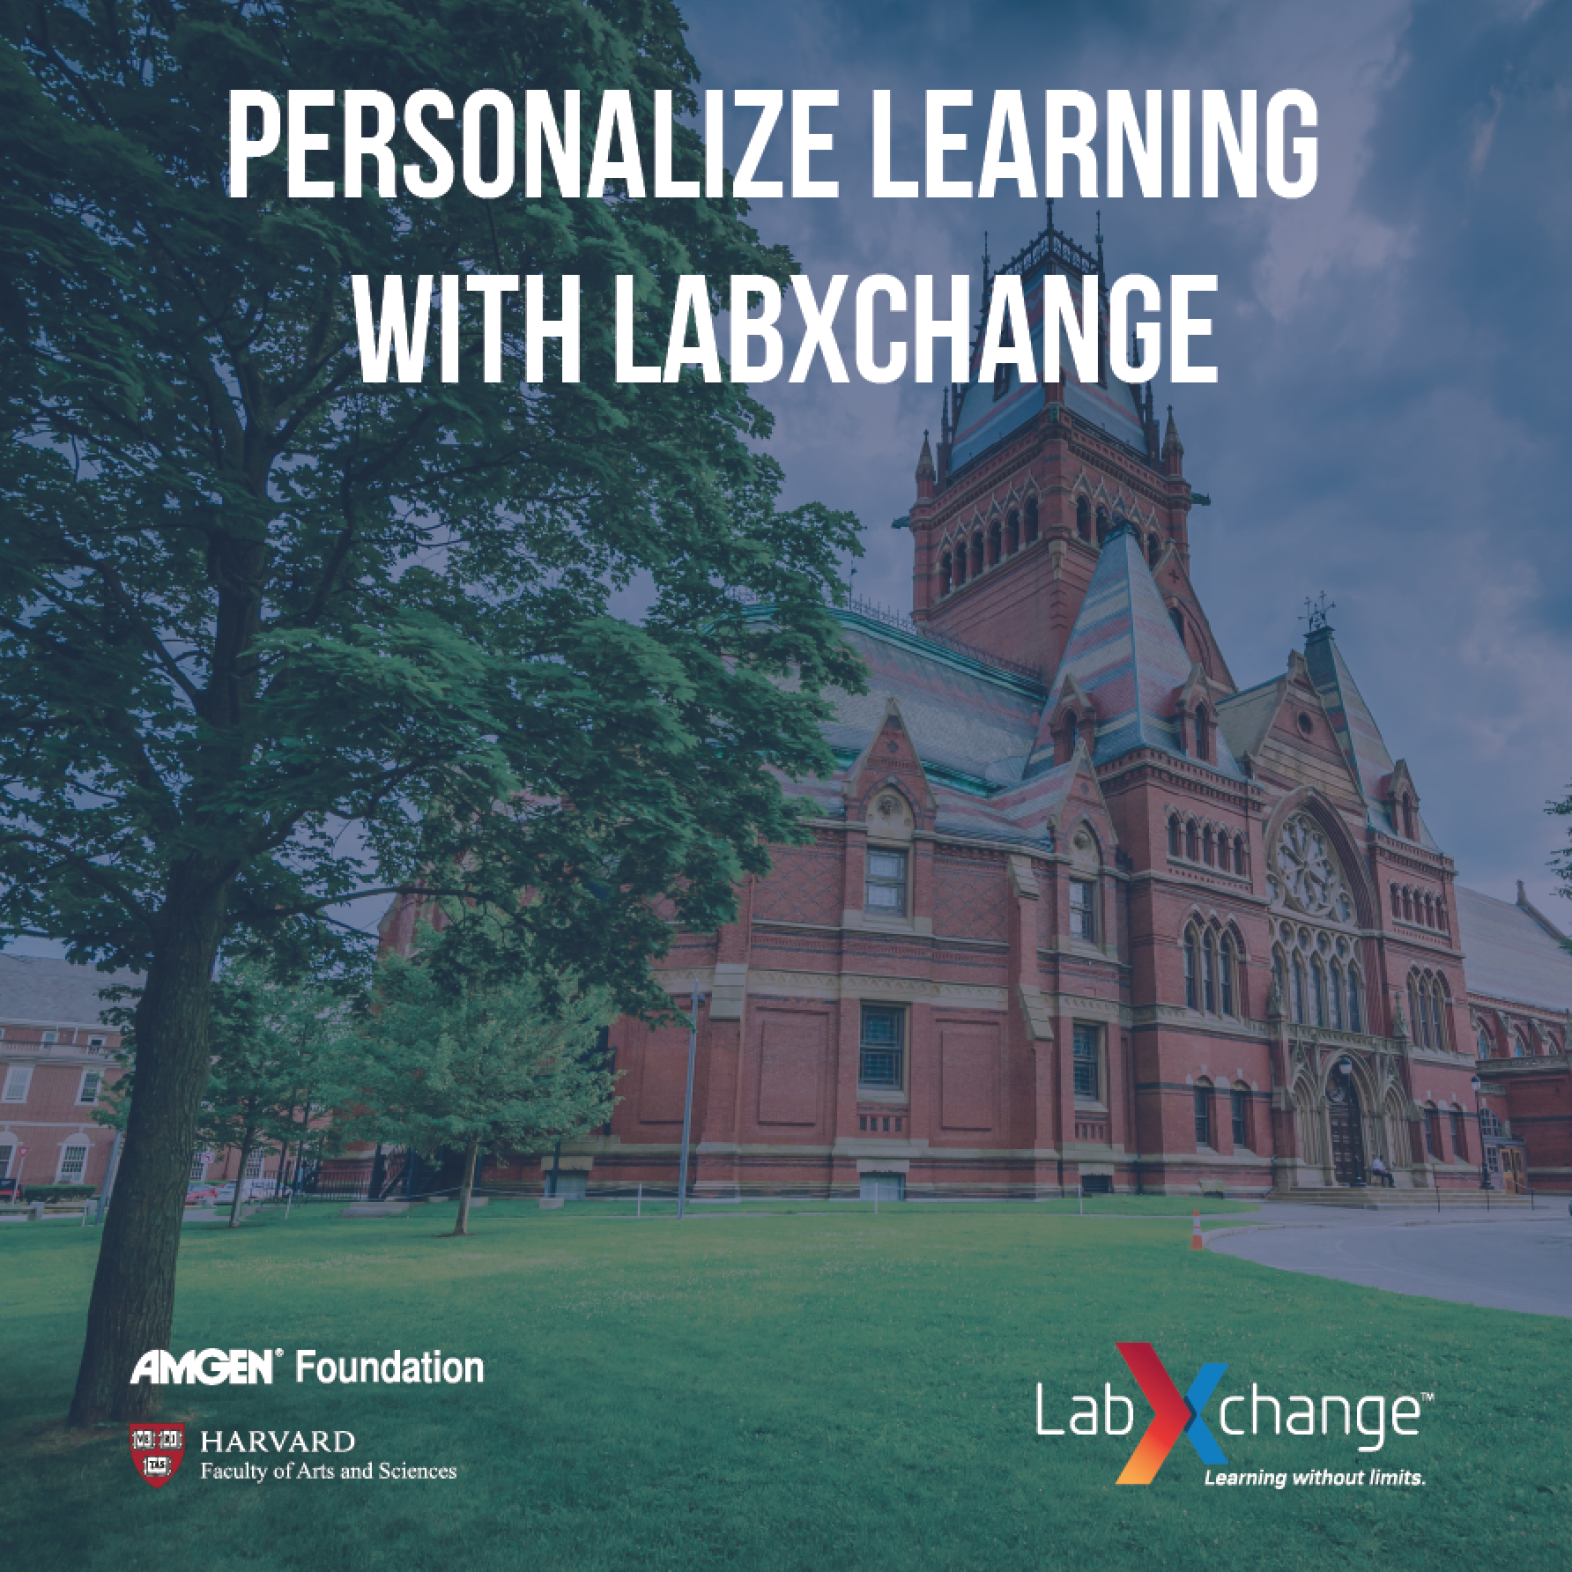 Harvard campus overlaid with the text, "Personalize learning with LabXchange."